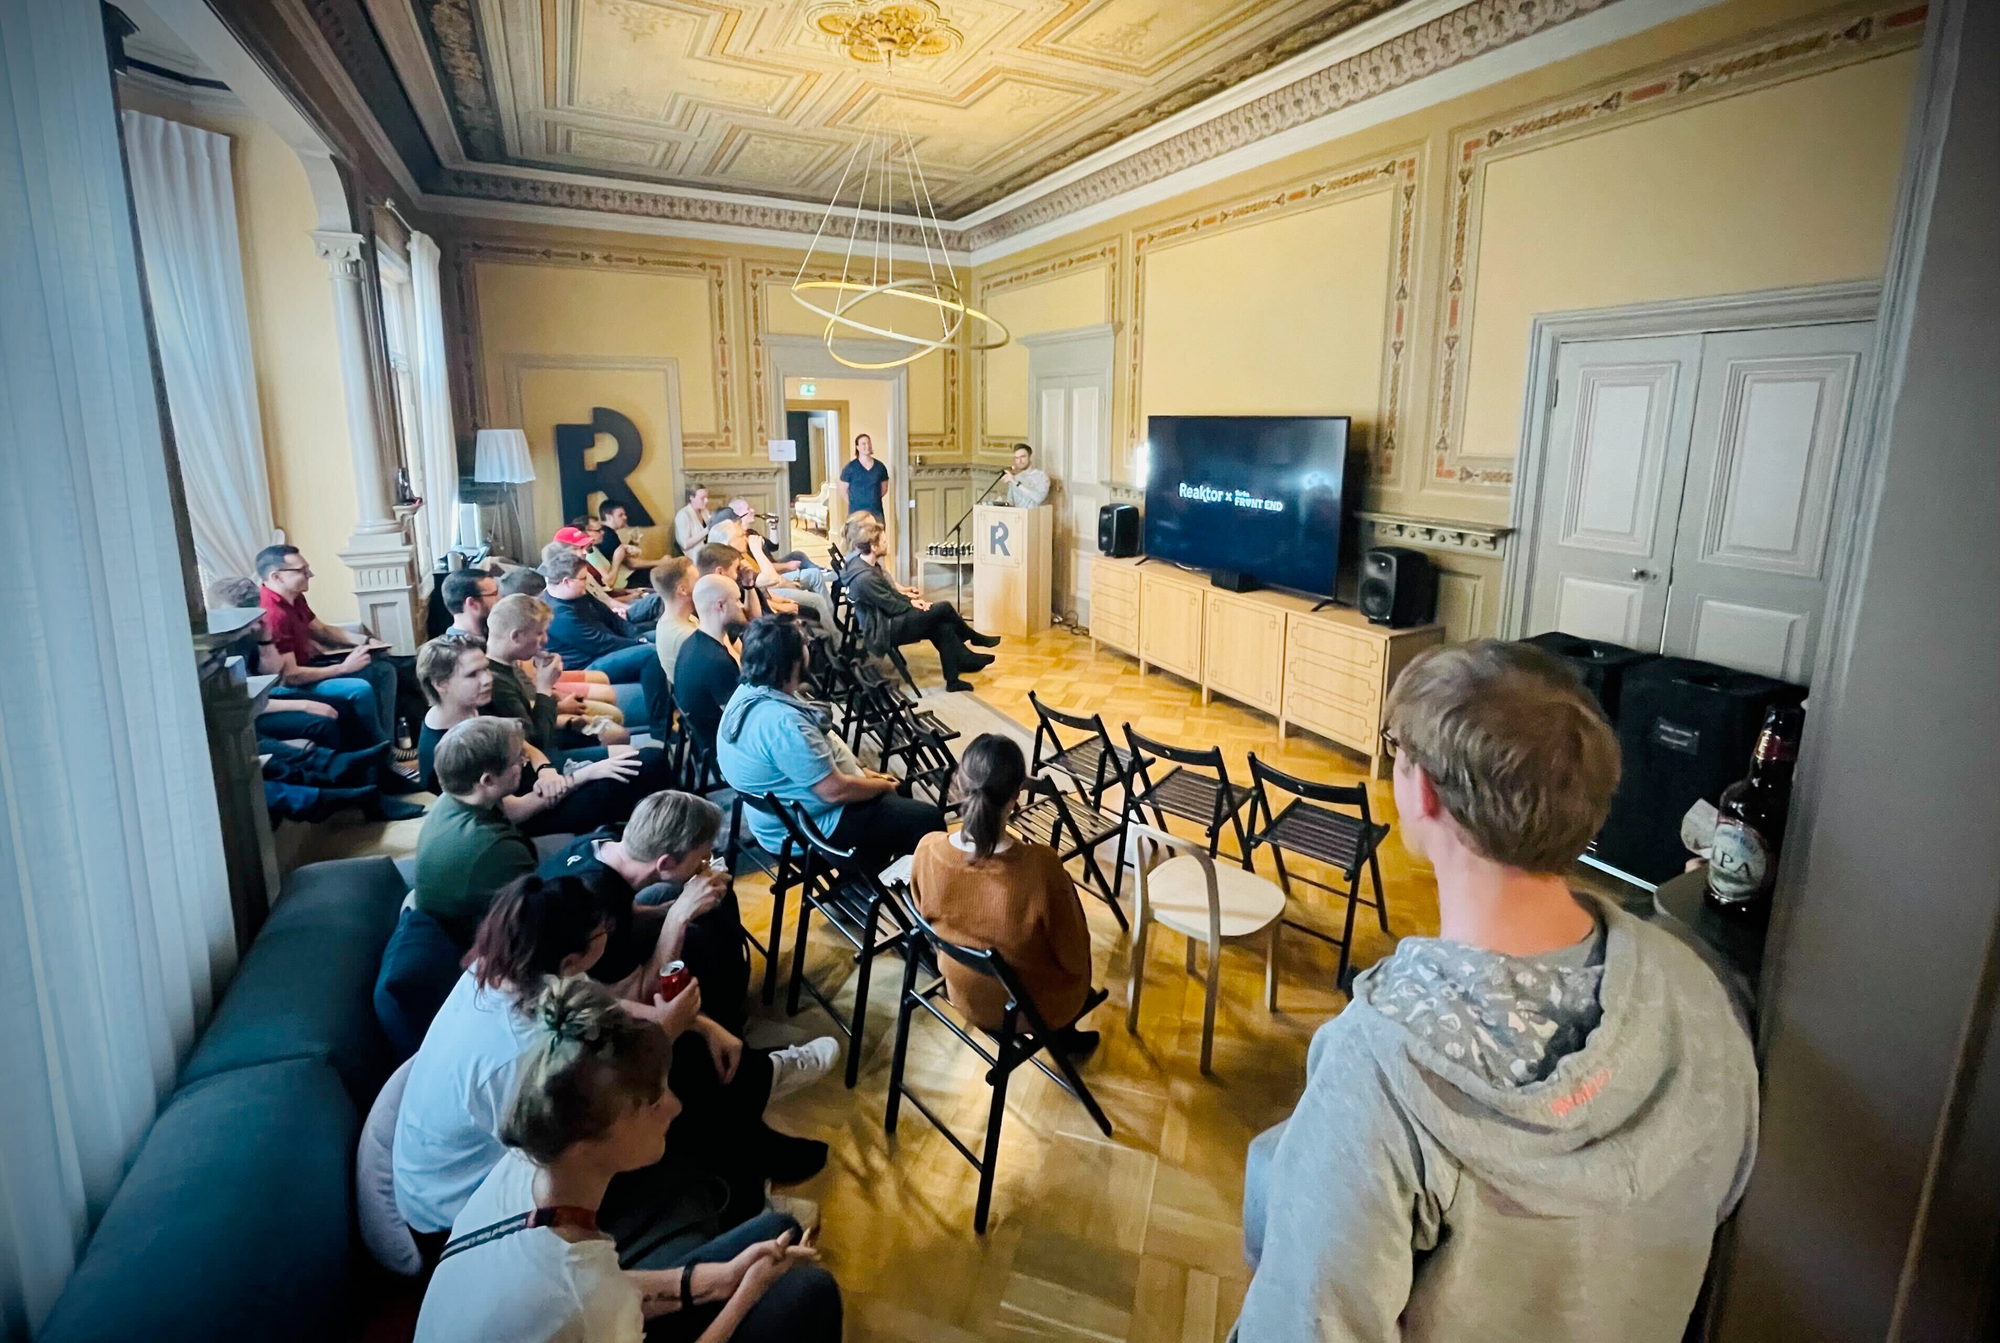 A group of people sitting in rows of chairs, listening to a person speaking in front of the room